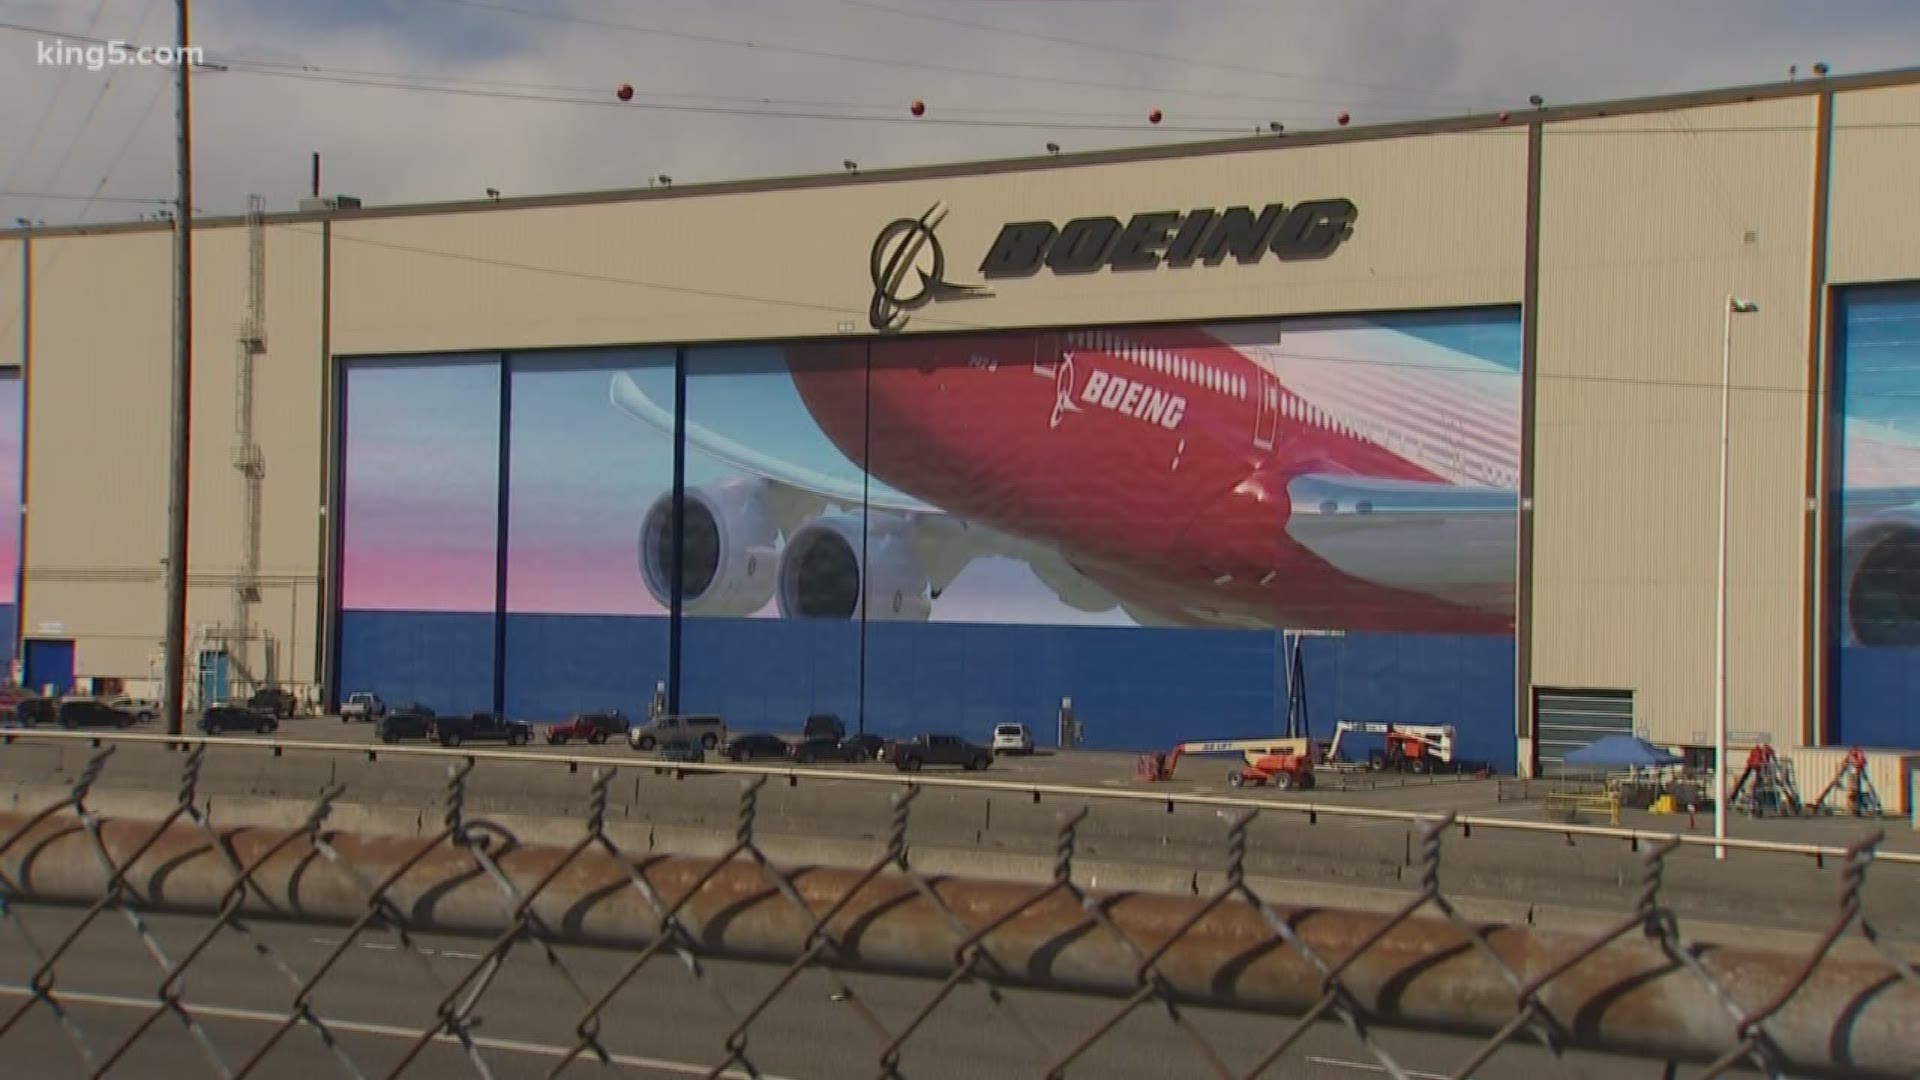 All work at assembly plants and other facilities will be suspended on Wednesday after a Boeing employee died of coronavirus.